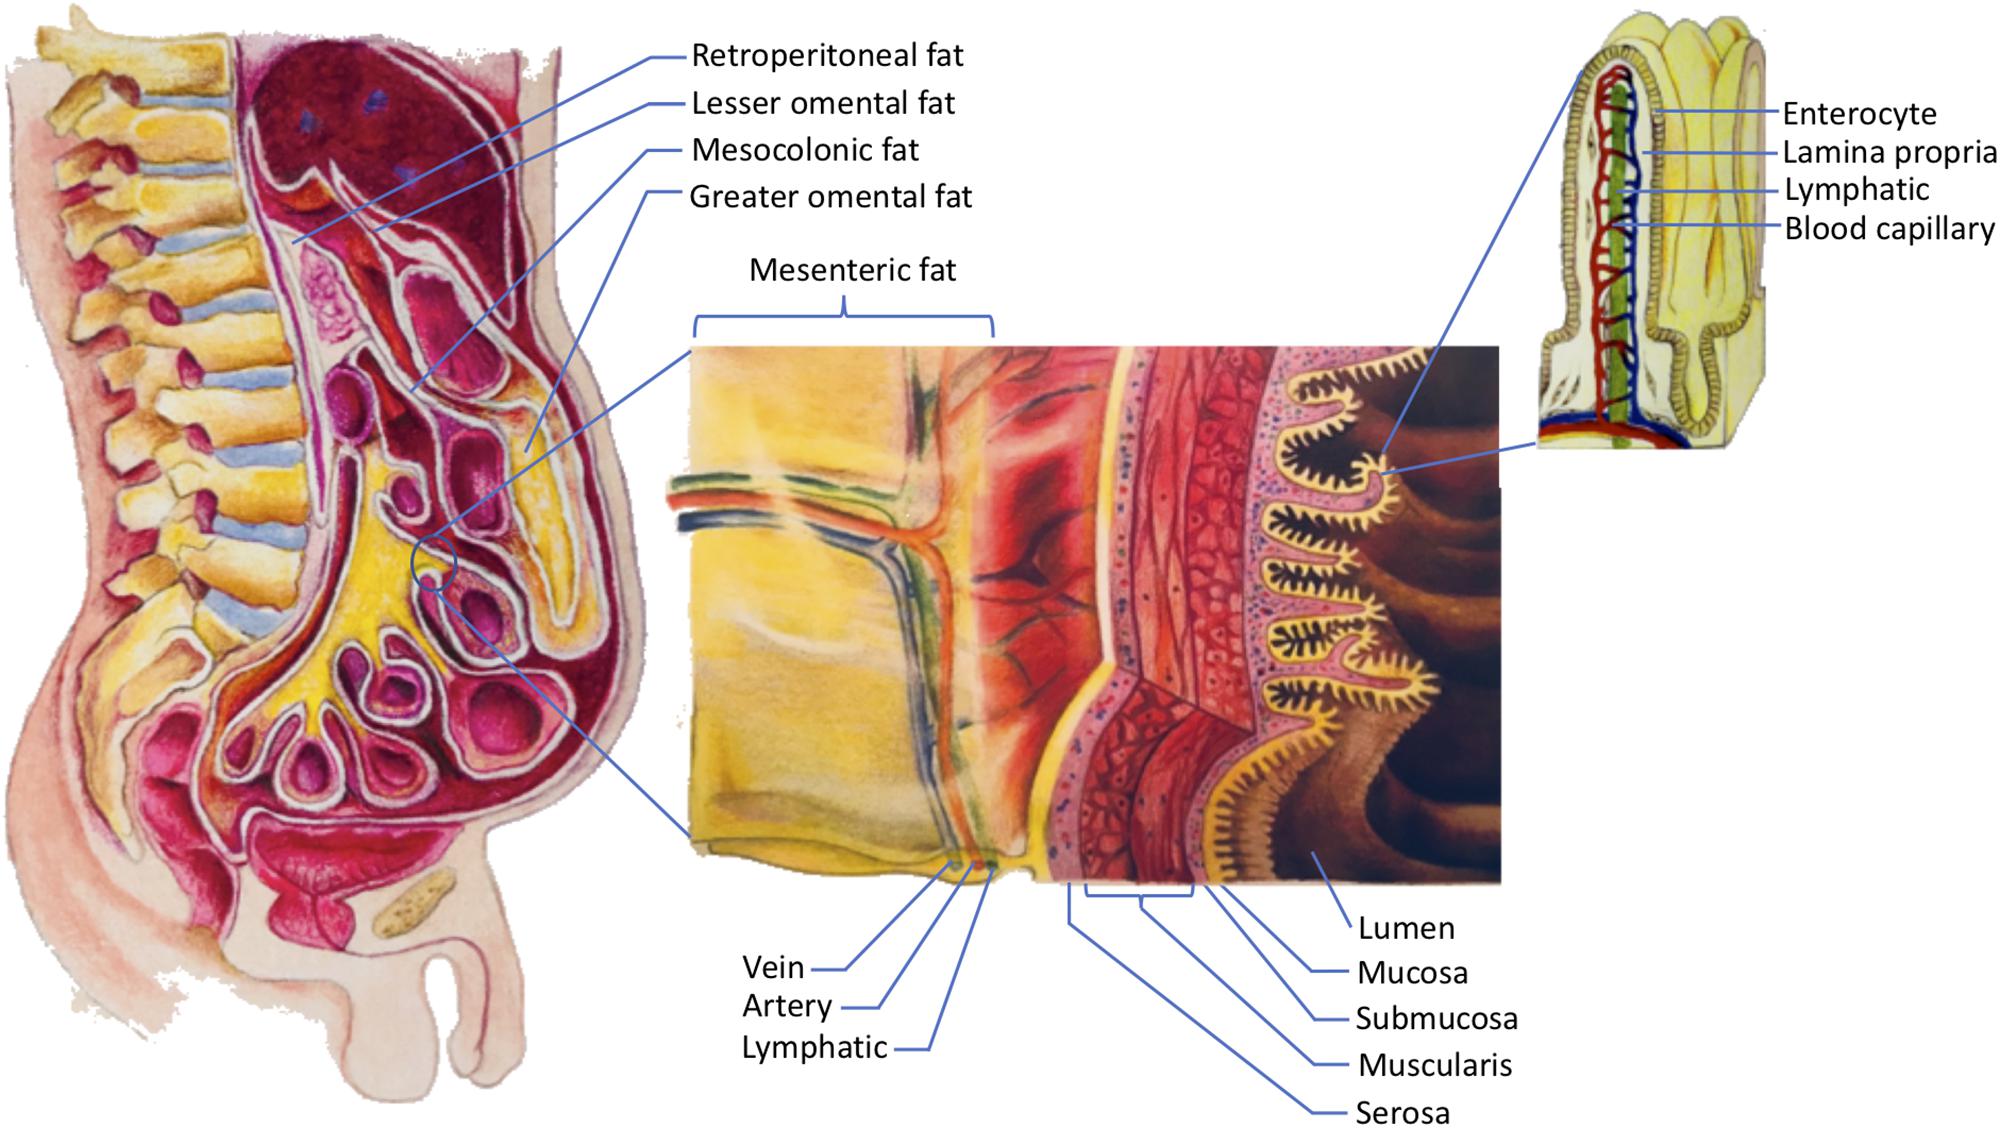 Frontiers | Why Do Men Accumulate Abdominal Visceral Fat?